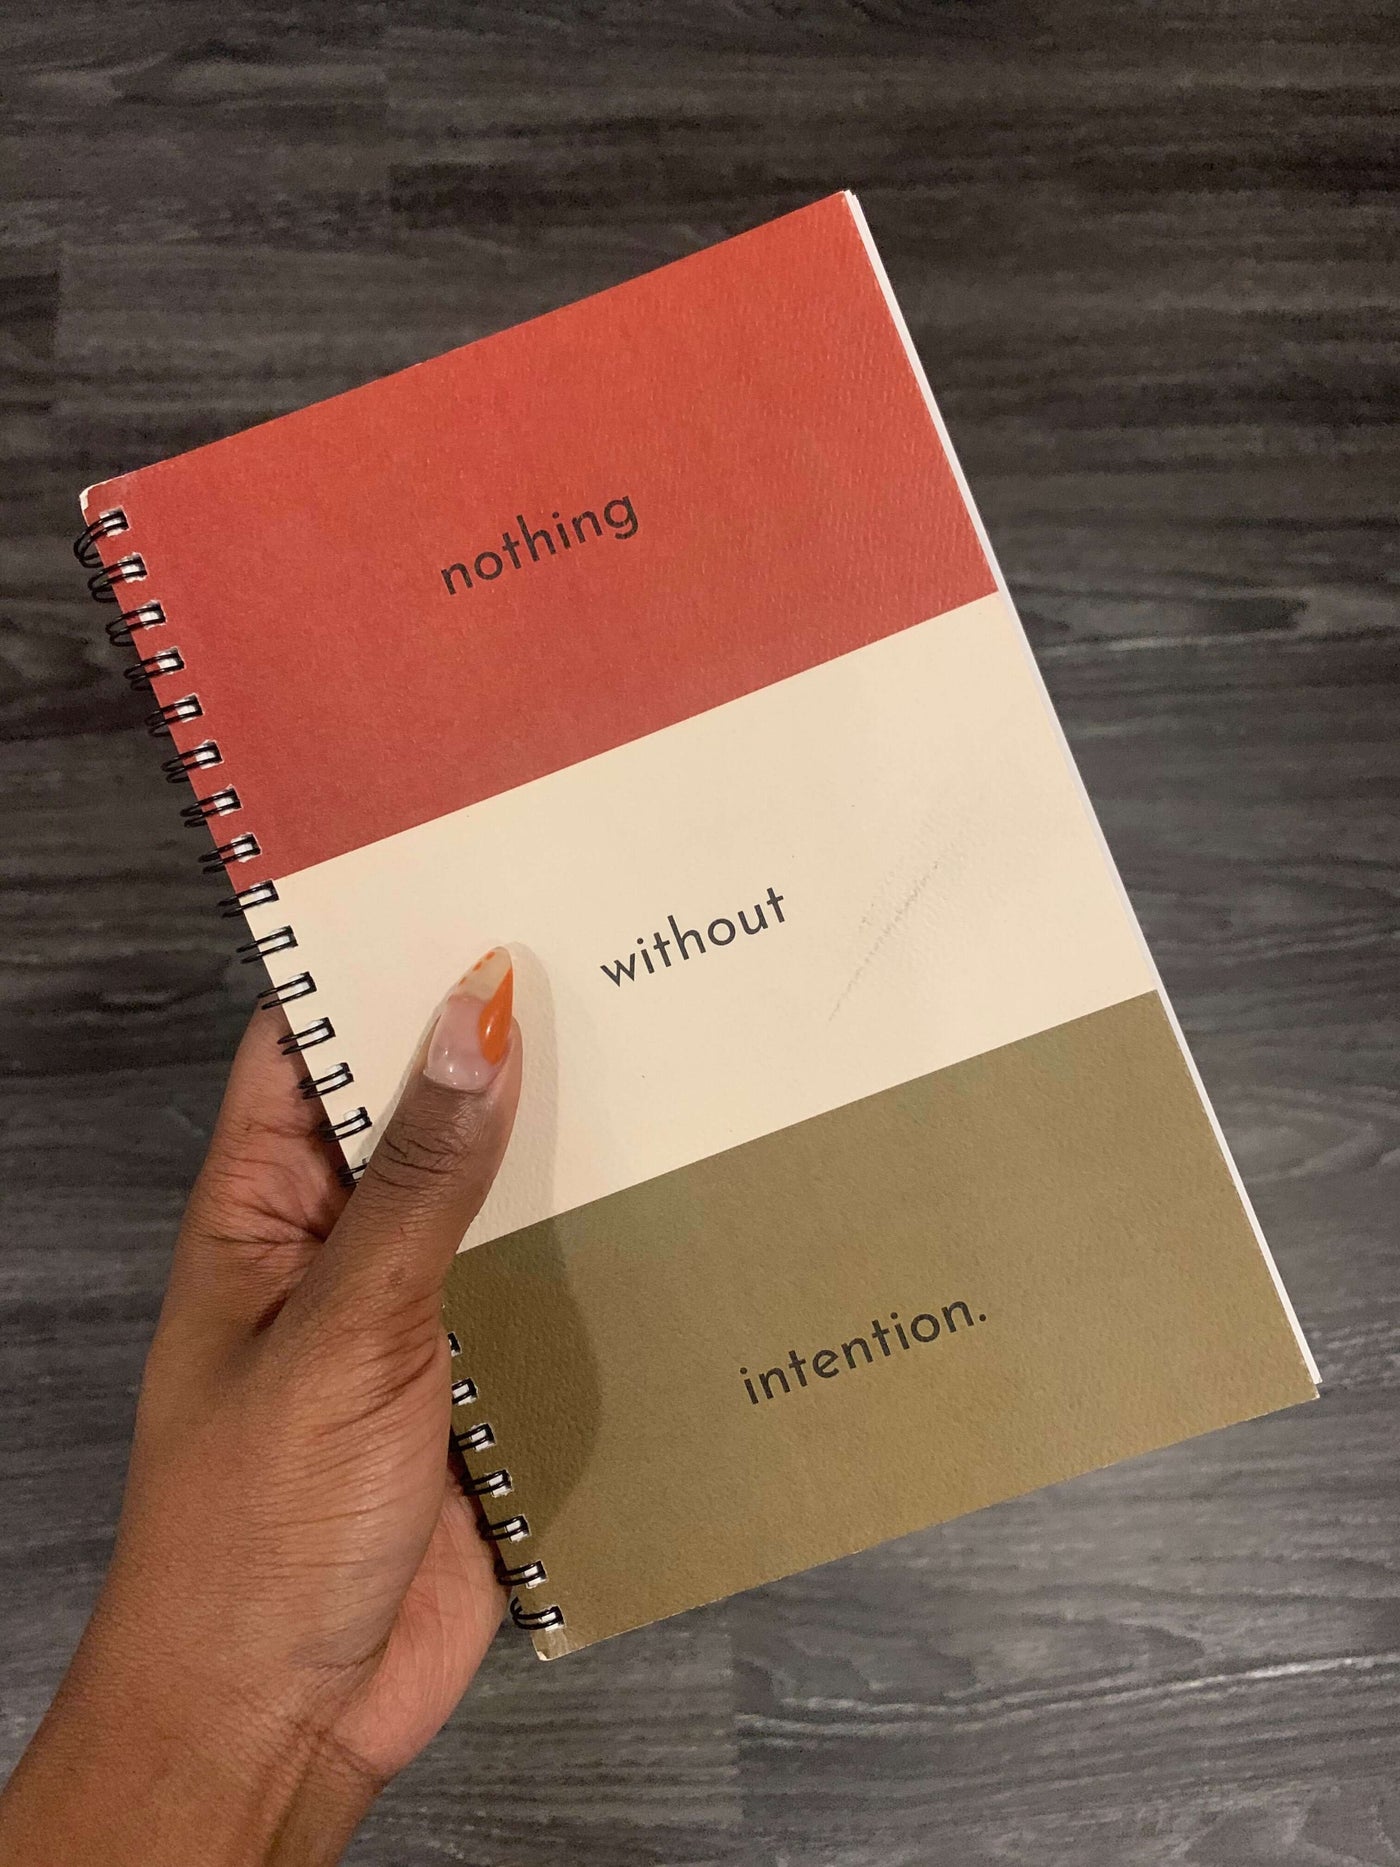 hand holding intention journal that is split into three equal colors of red white and greenish brown that read "nothing", "without", "intention" in each space on the cover